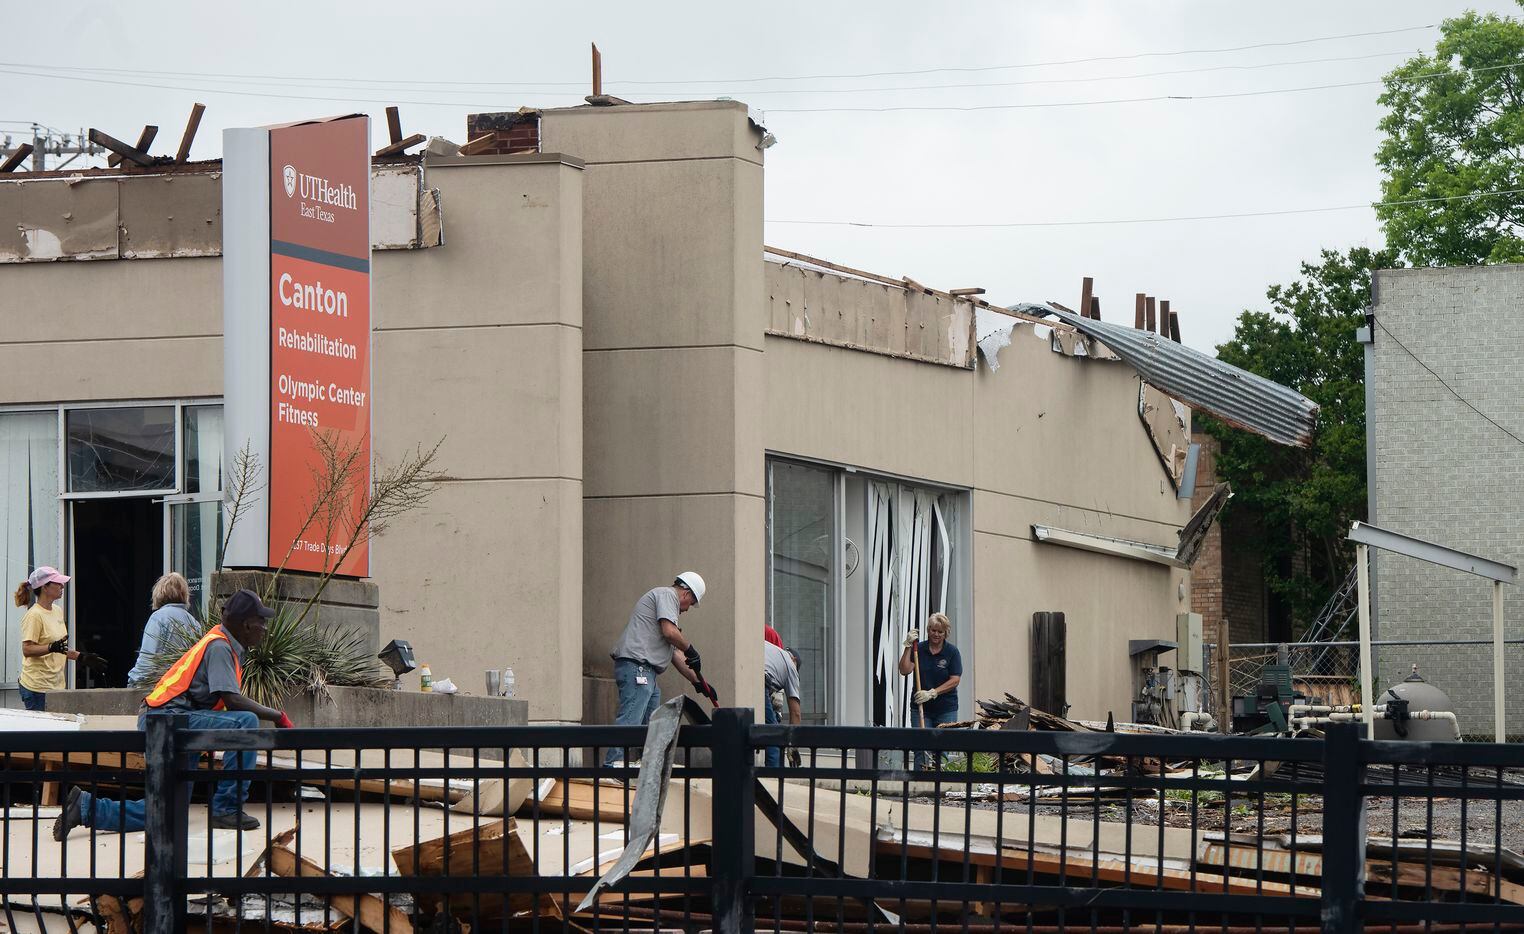 Damage to the UT Health East Texas Canton Rehabilitation and Olympic Center Fitness building in Canton, Texas is seen on Thursday, May 30, 2019, the day after several tornadoes came through Van Zandt County and Canton.